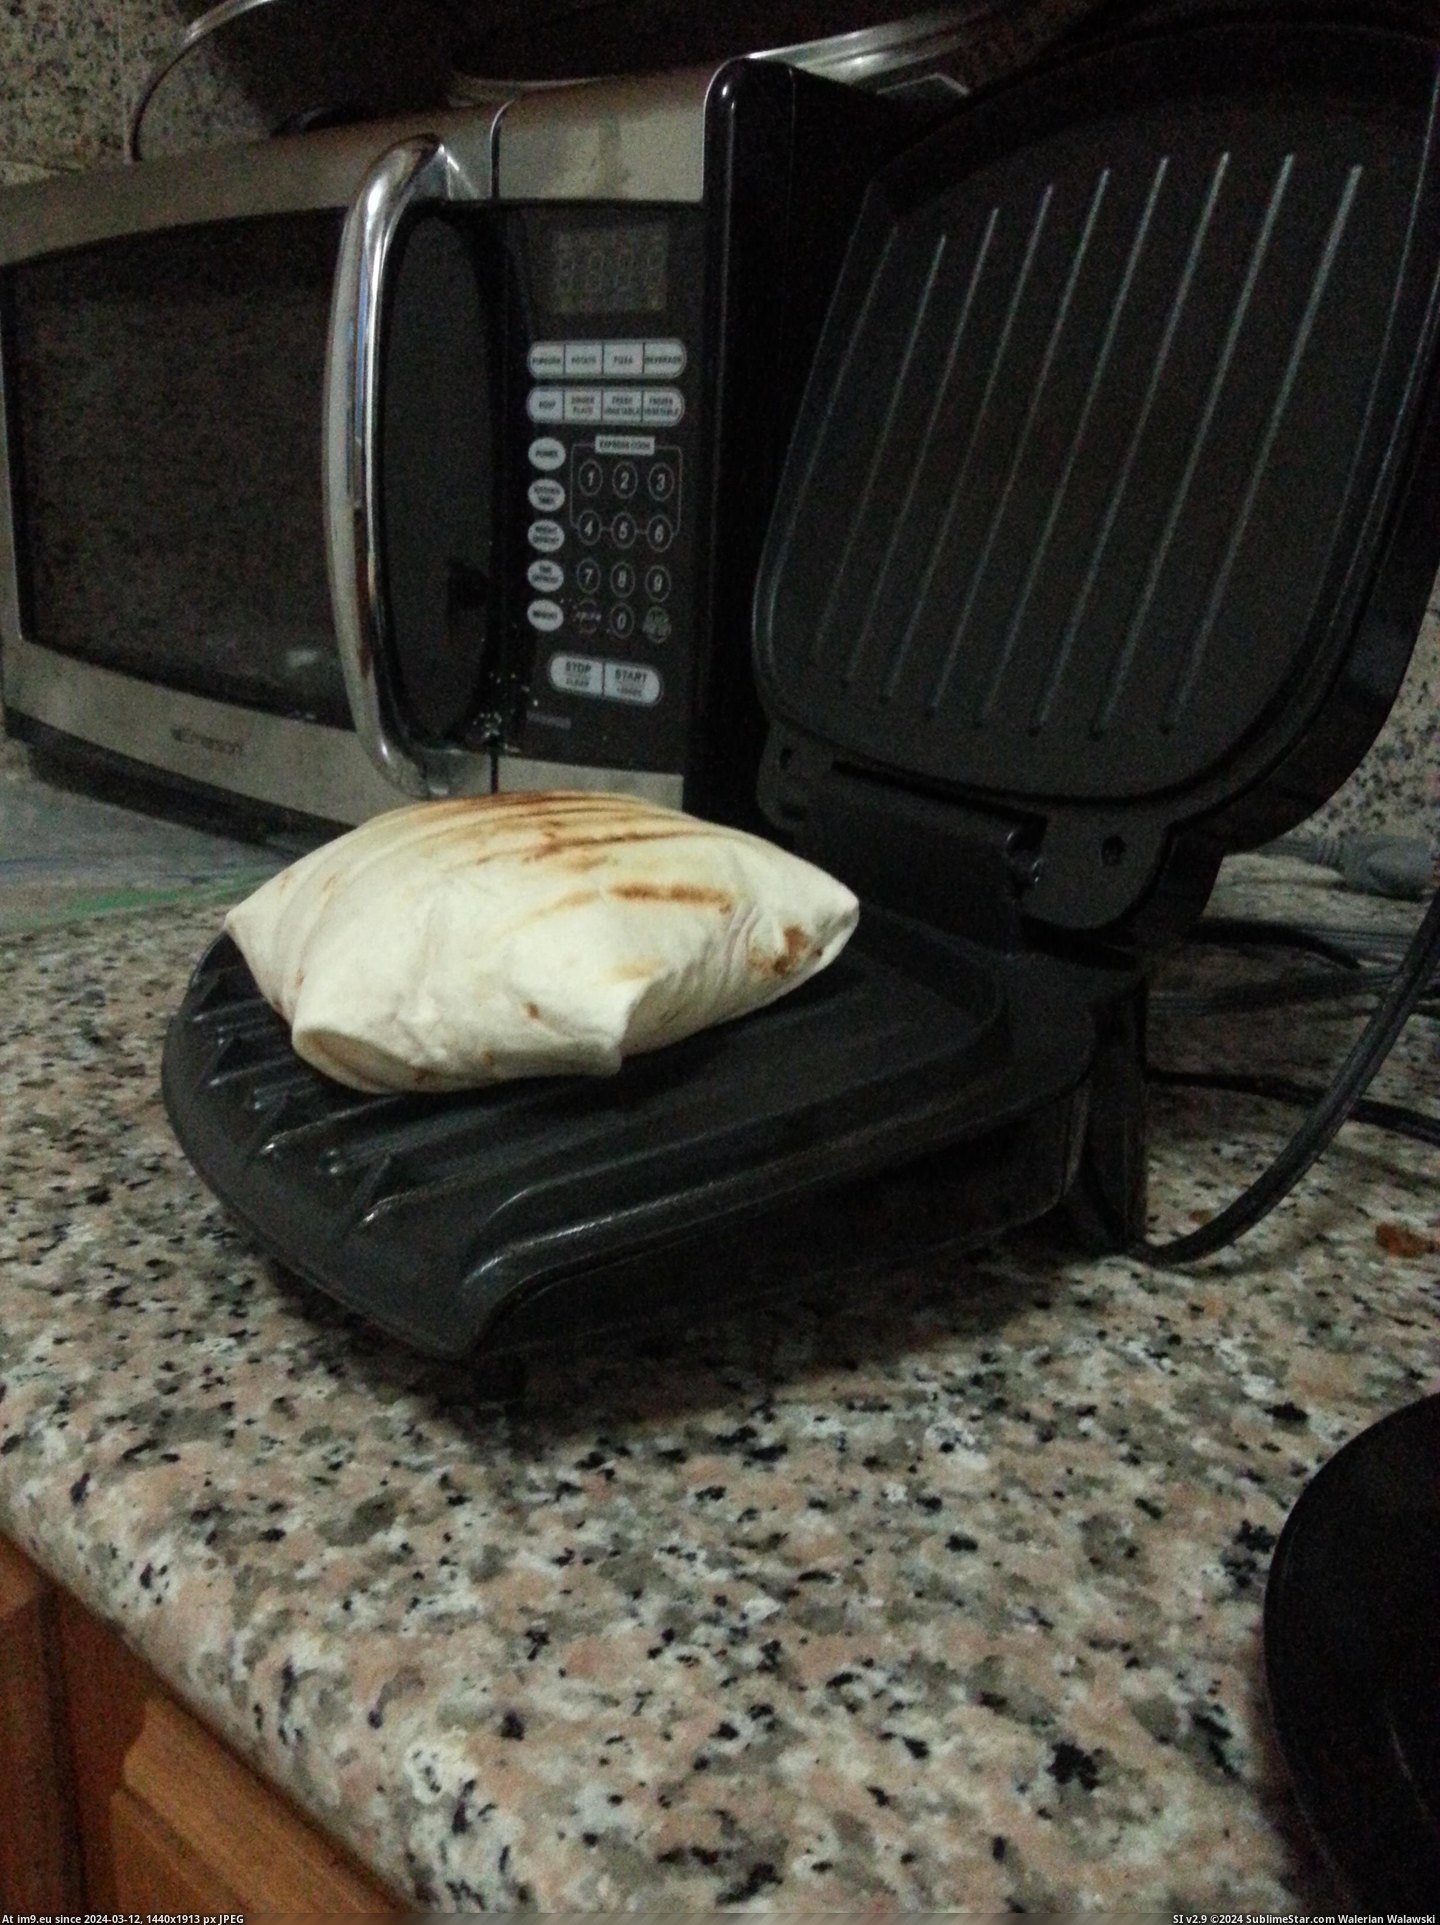 #Too #Air #Any #Inflated #Crac #Expanding #Quesadilla #Perfectly #Cheese #Folded [Mildlyinteresting] I made a quesadilla and folded it too perfectly. It inflated from air expanding and the cheese kept any crac Pic. (Изображение из альбом My r/MILDLYINTERESTING favs))